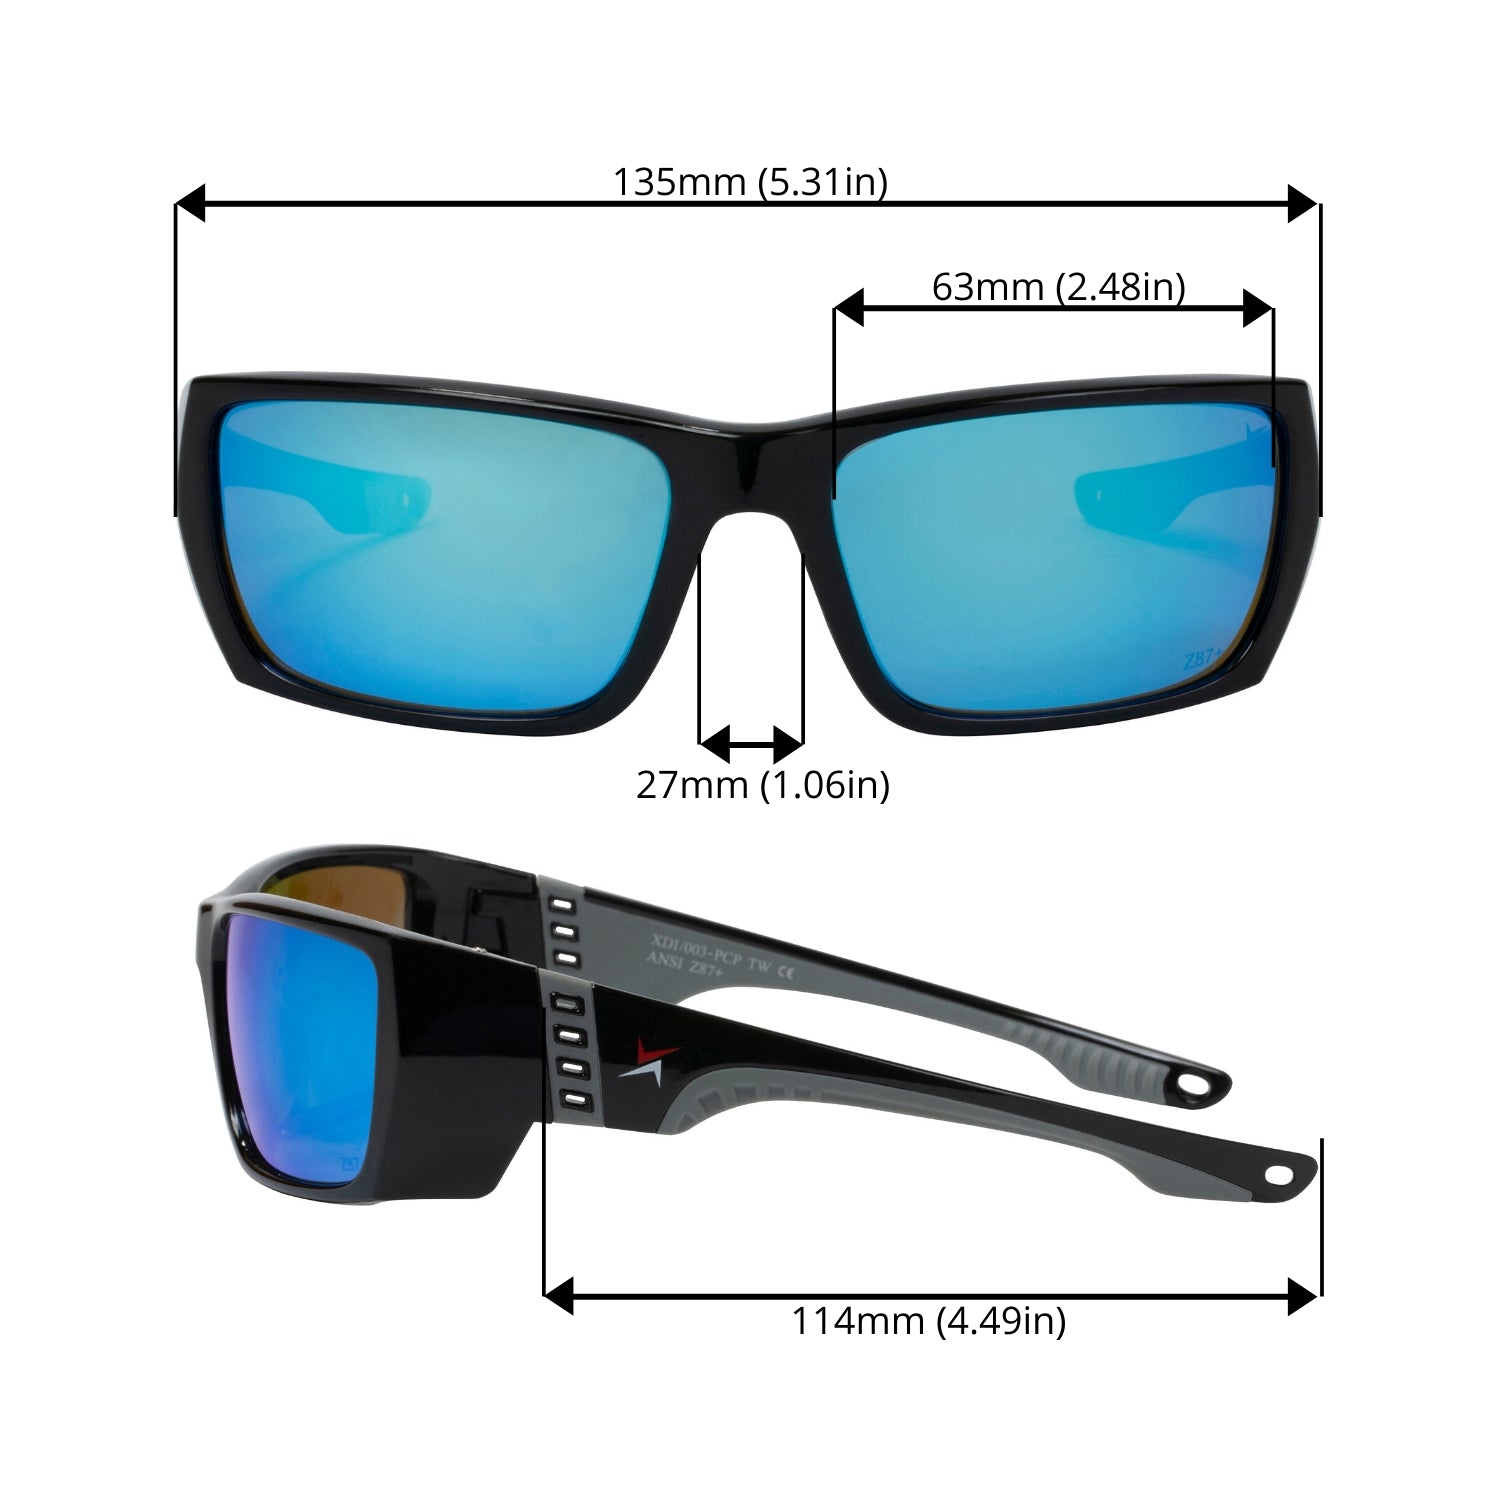 Polycarbonate Polarized Blue Mirror Lens Sport Safety Sunglasses with Grey Rubber Accents.